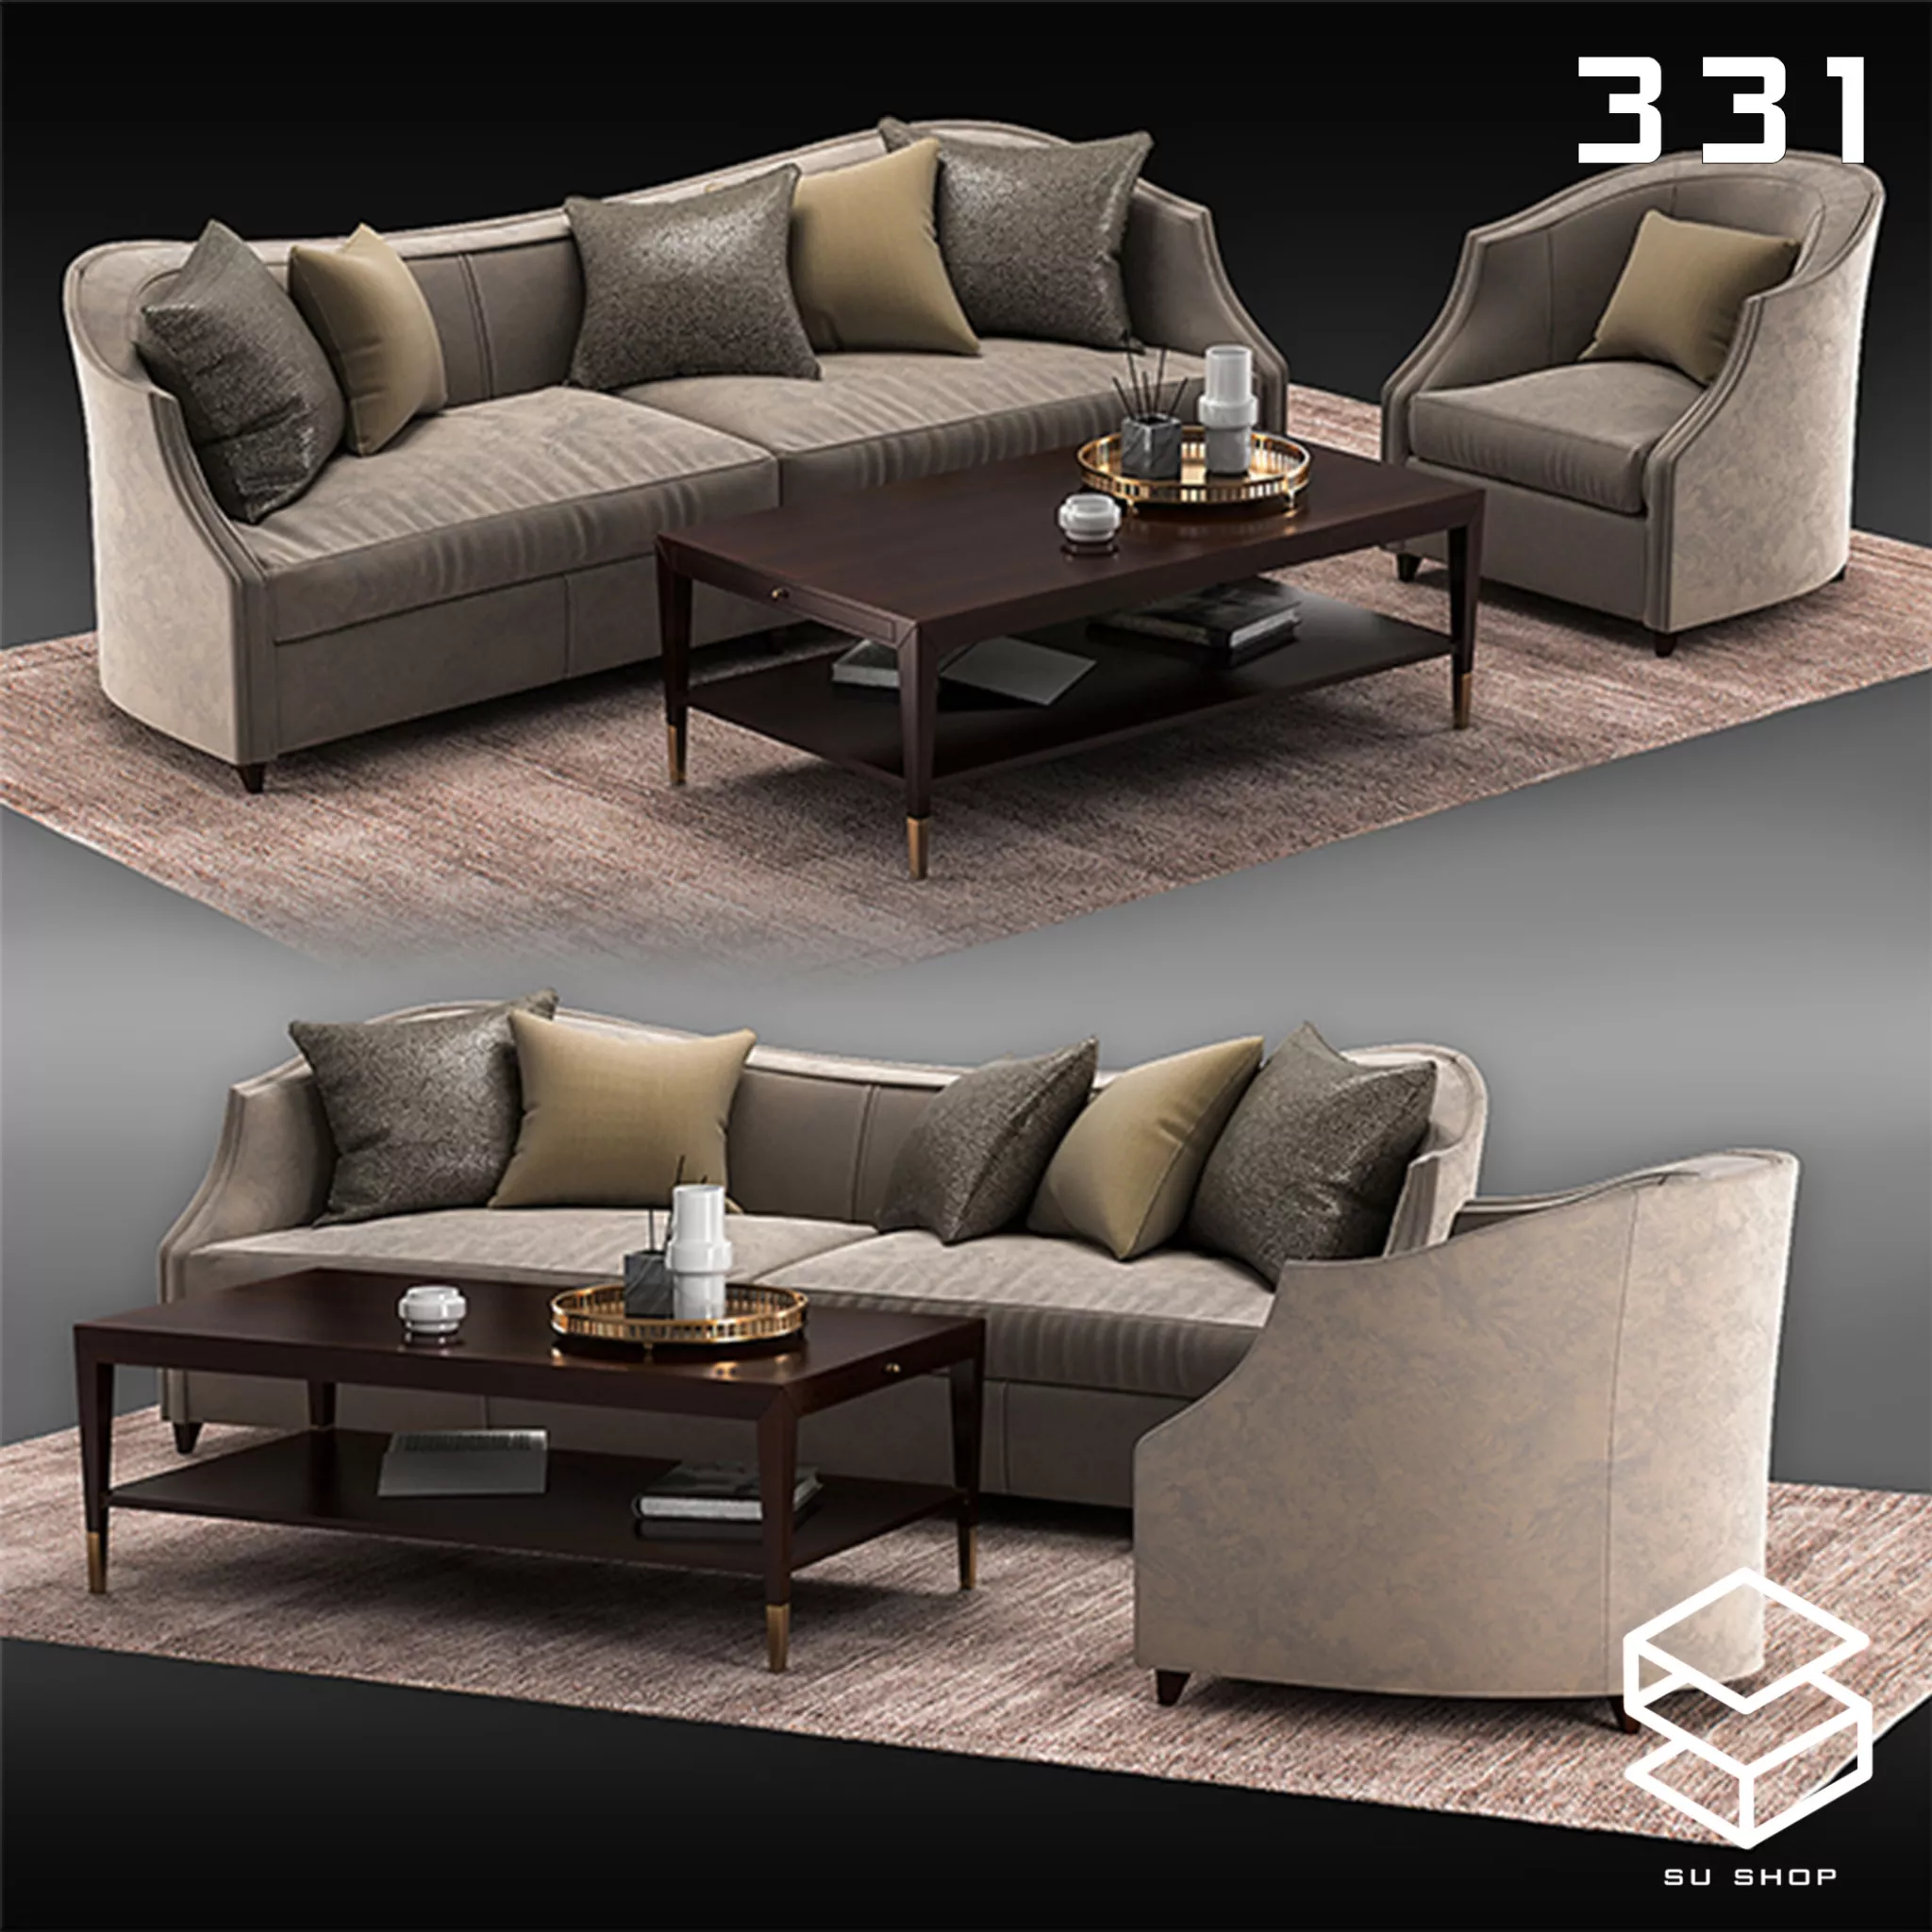 MODERN SOFA - SKETCHUP 3D MODEL - VRAY OR ENSCAPE - ID13643